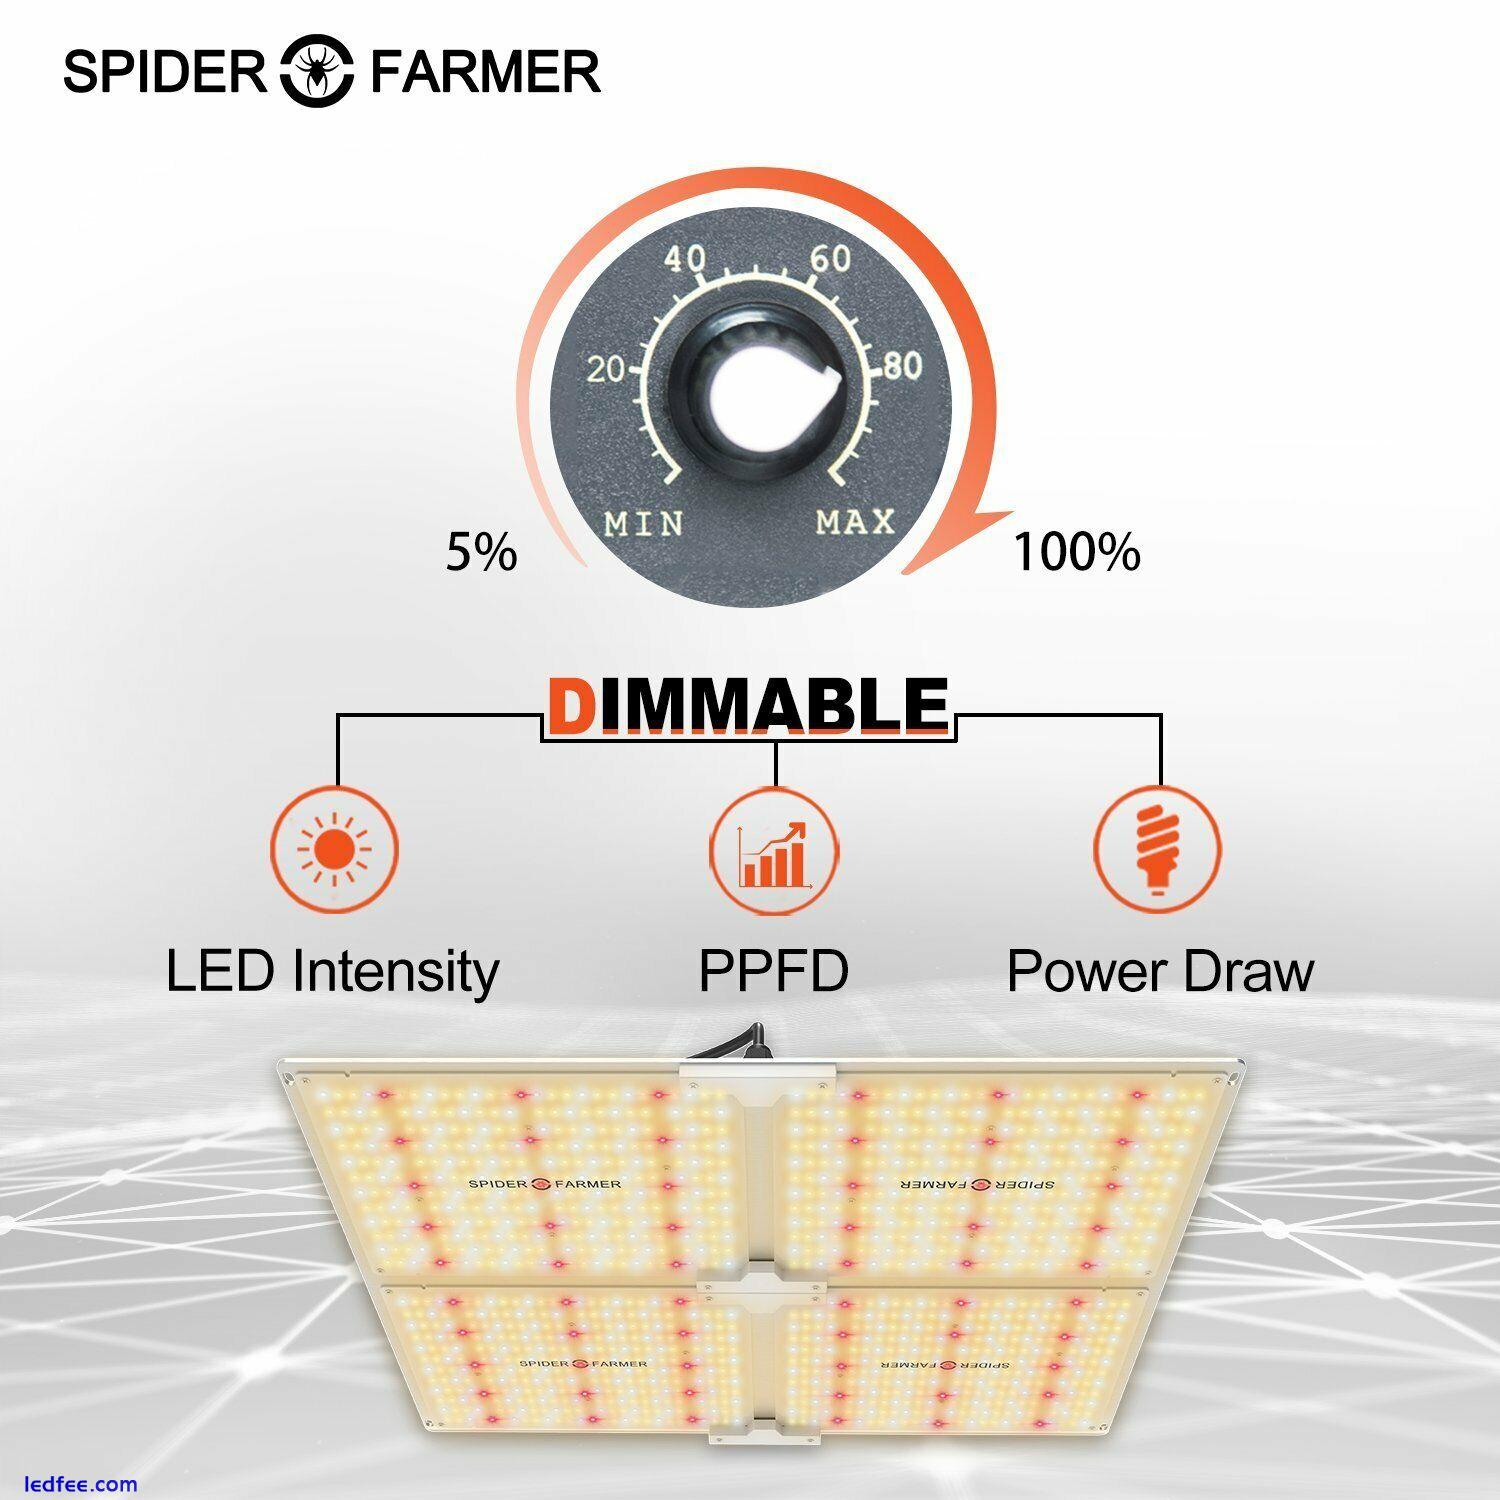 Spider Farmer SF4000 LED Grow Light With Dimmer Knob 2021 New Version QB 5 